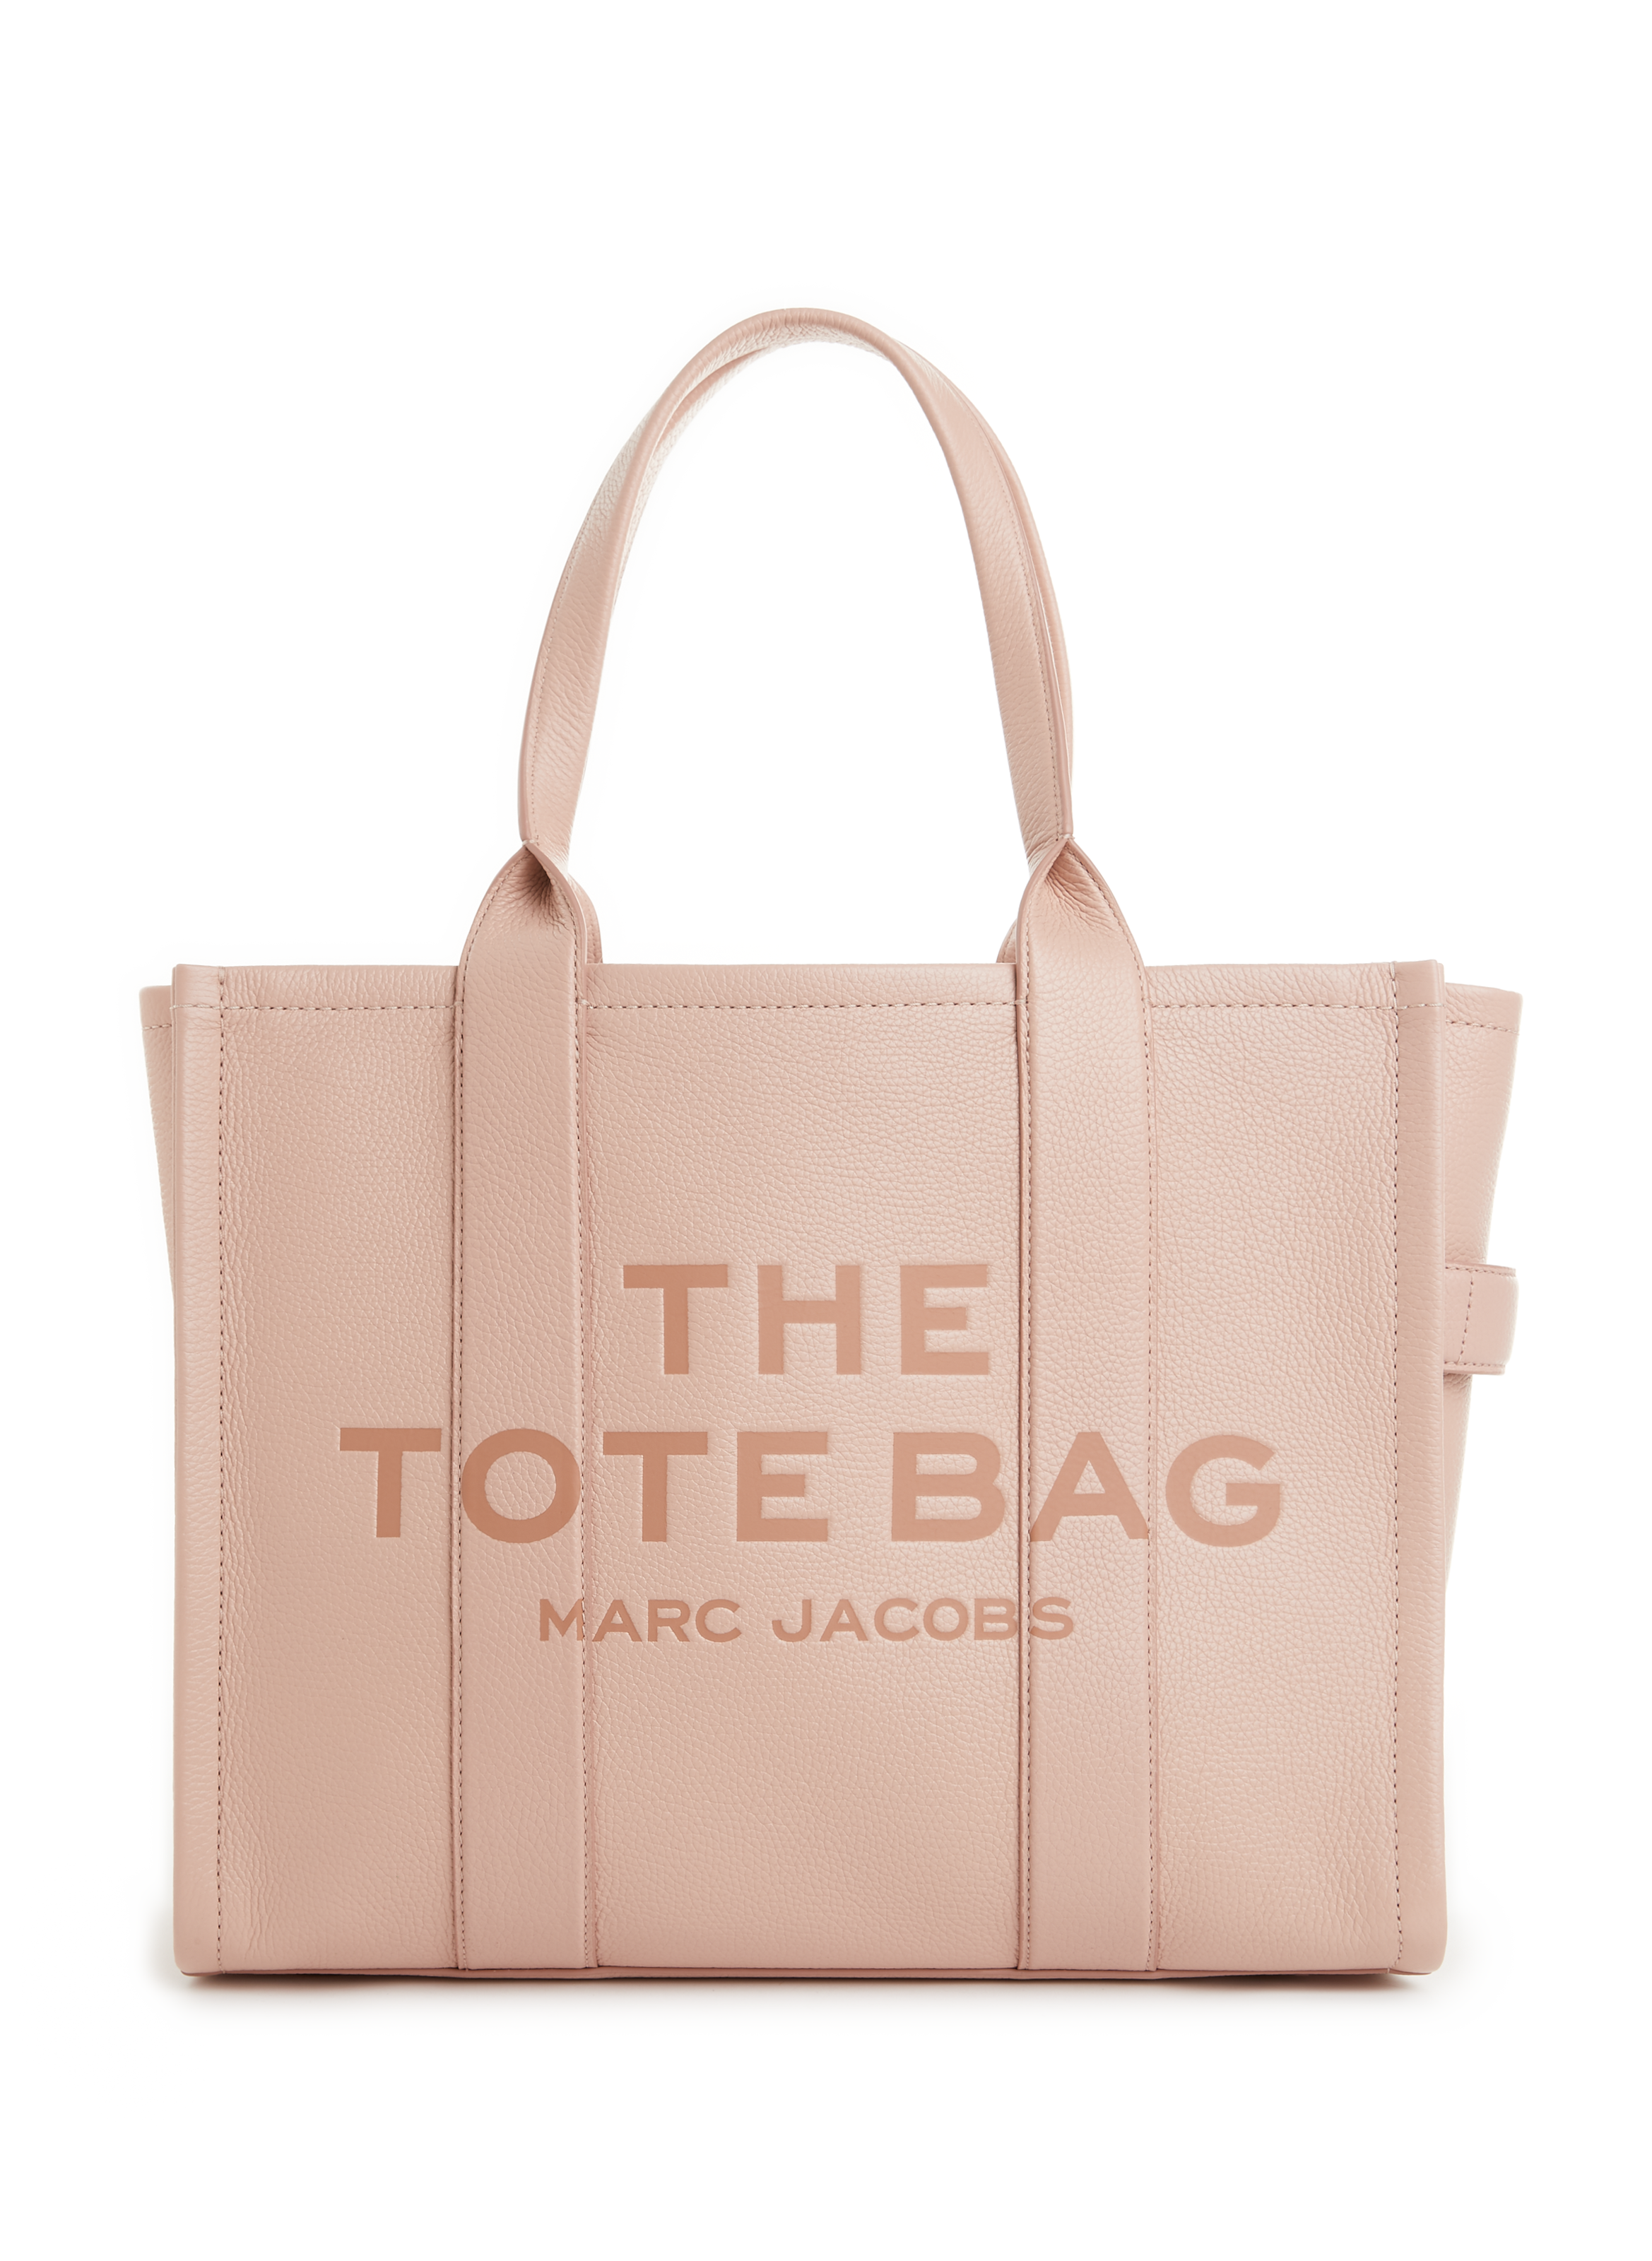 THE TOTE LARGE TOTE BAG MARC JACOBS for WOMEN